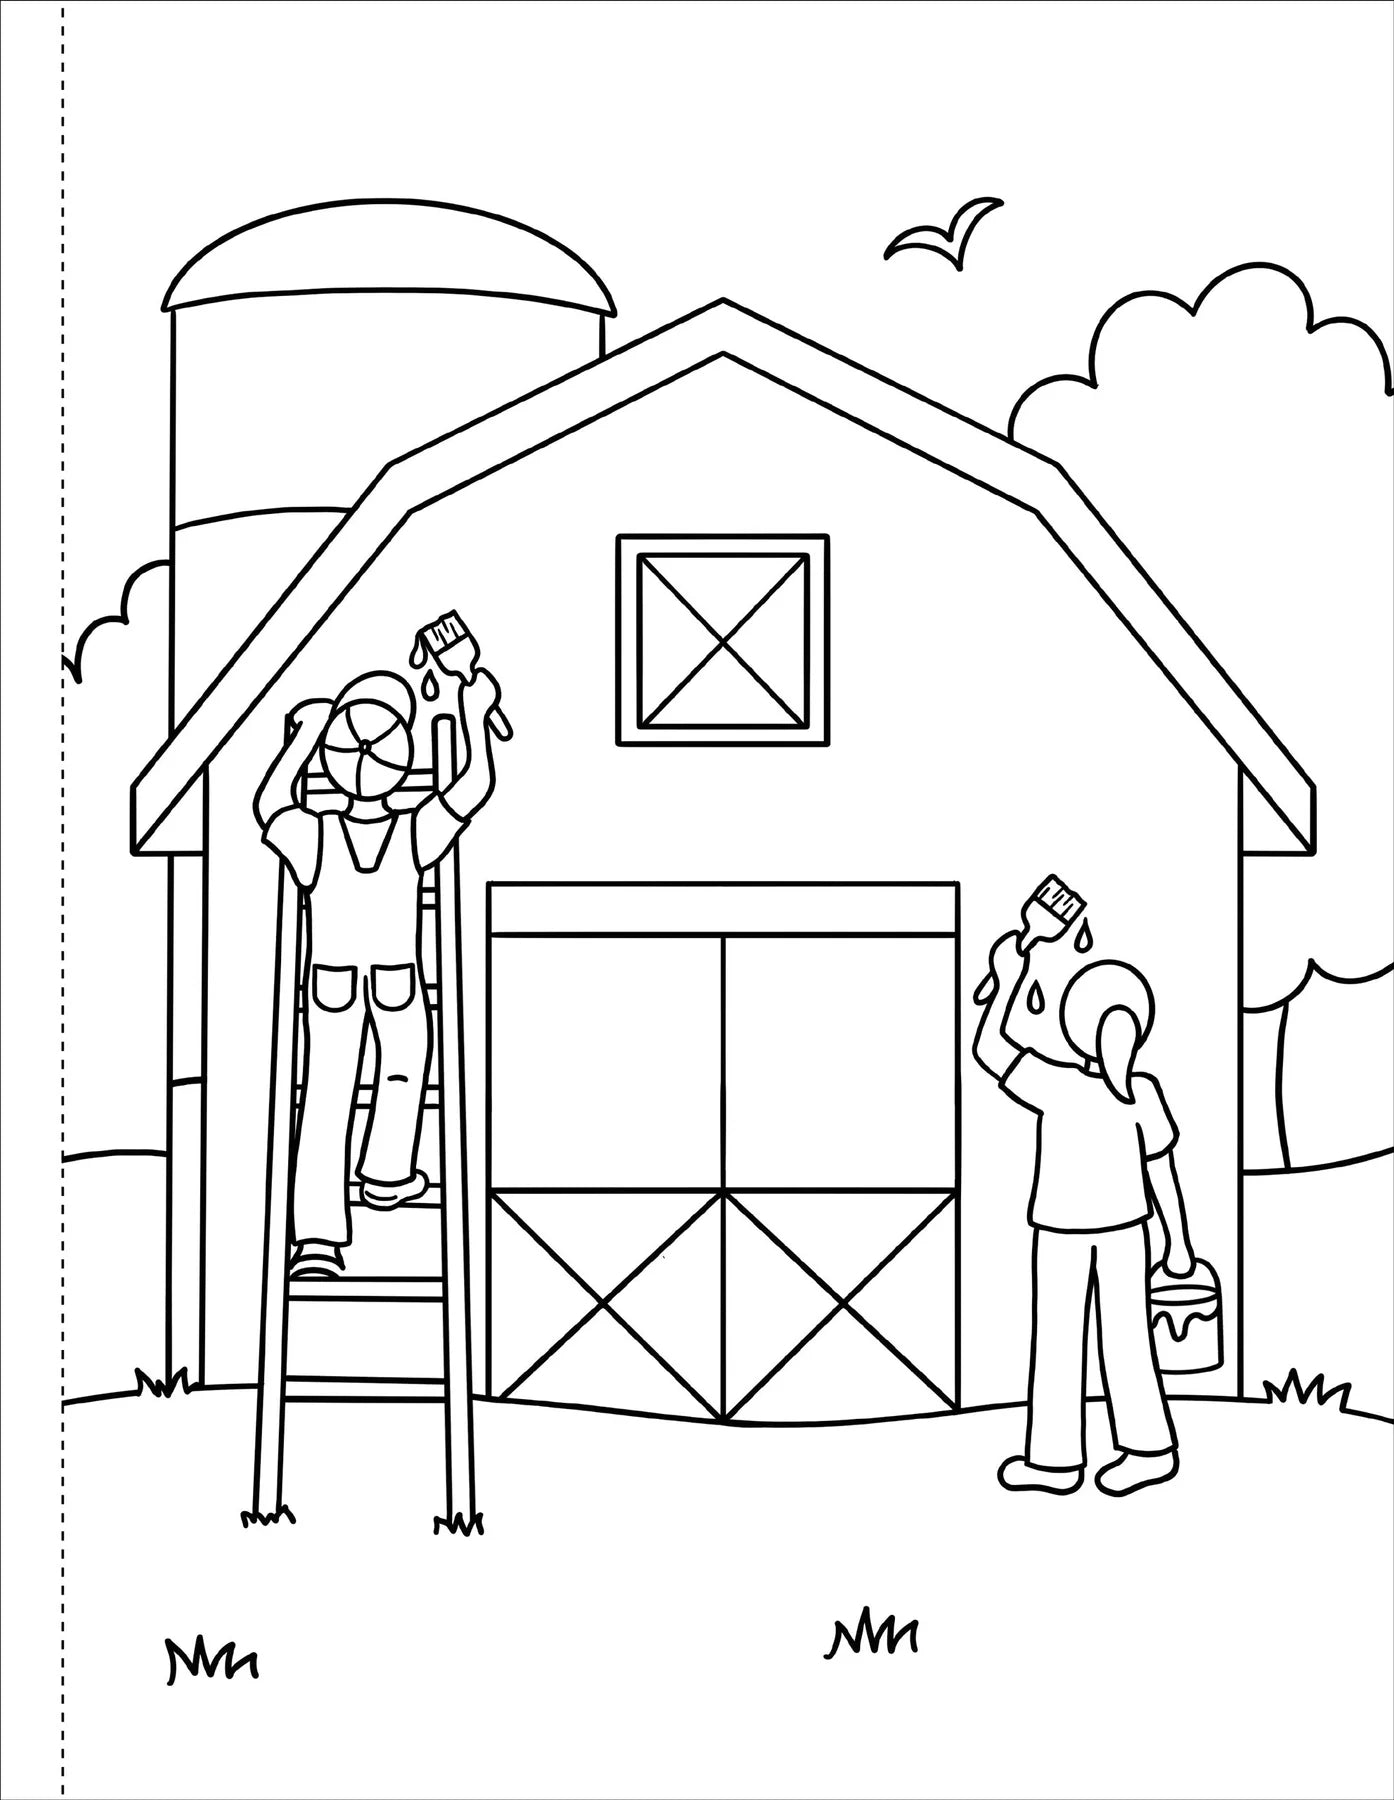 My First Coloring Book! On the Farm!